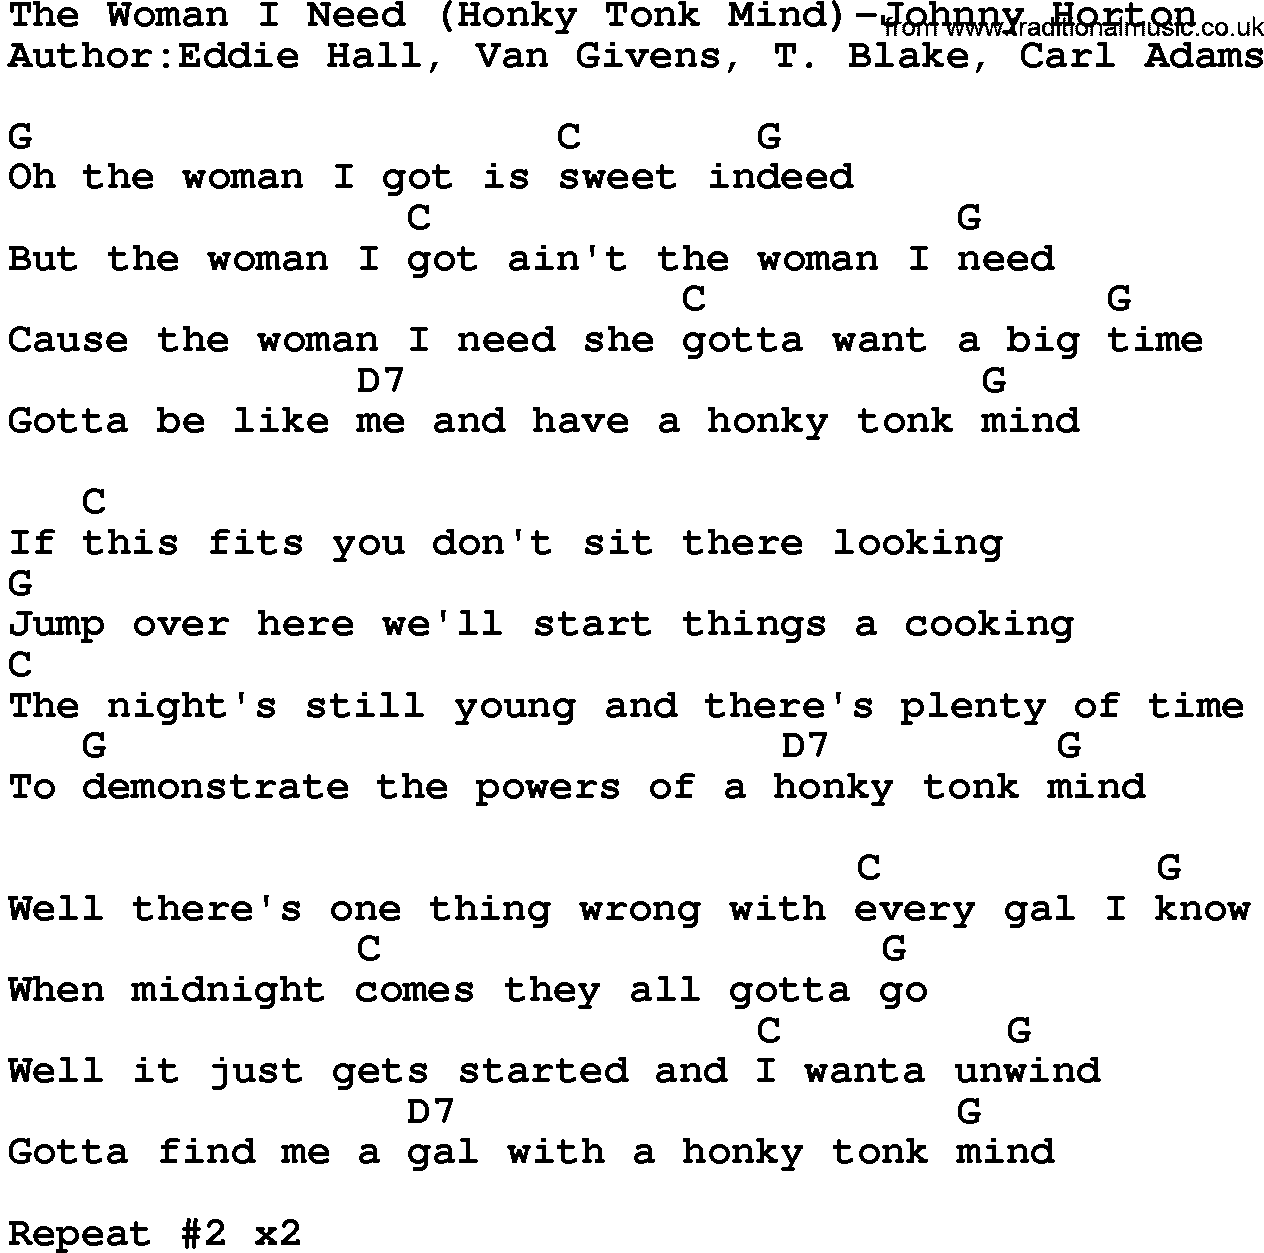 Country music song: The Woman I Need(Honky Tonk Mind)-Johnny Horton lyrics and chords